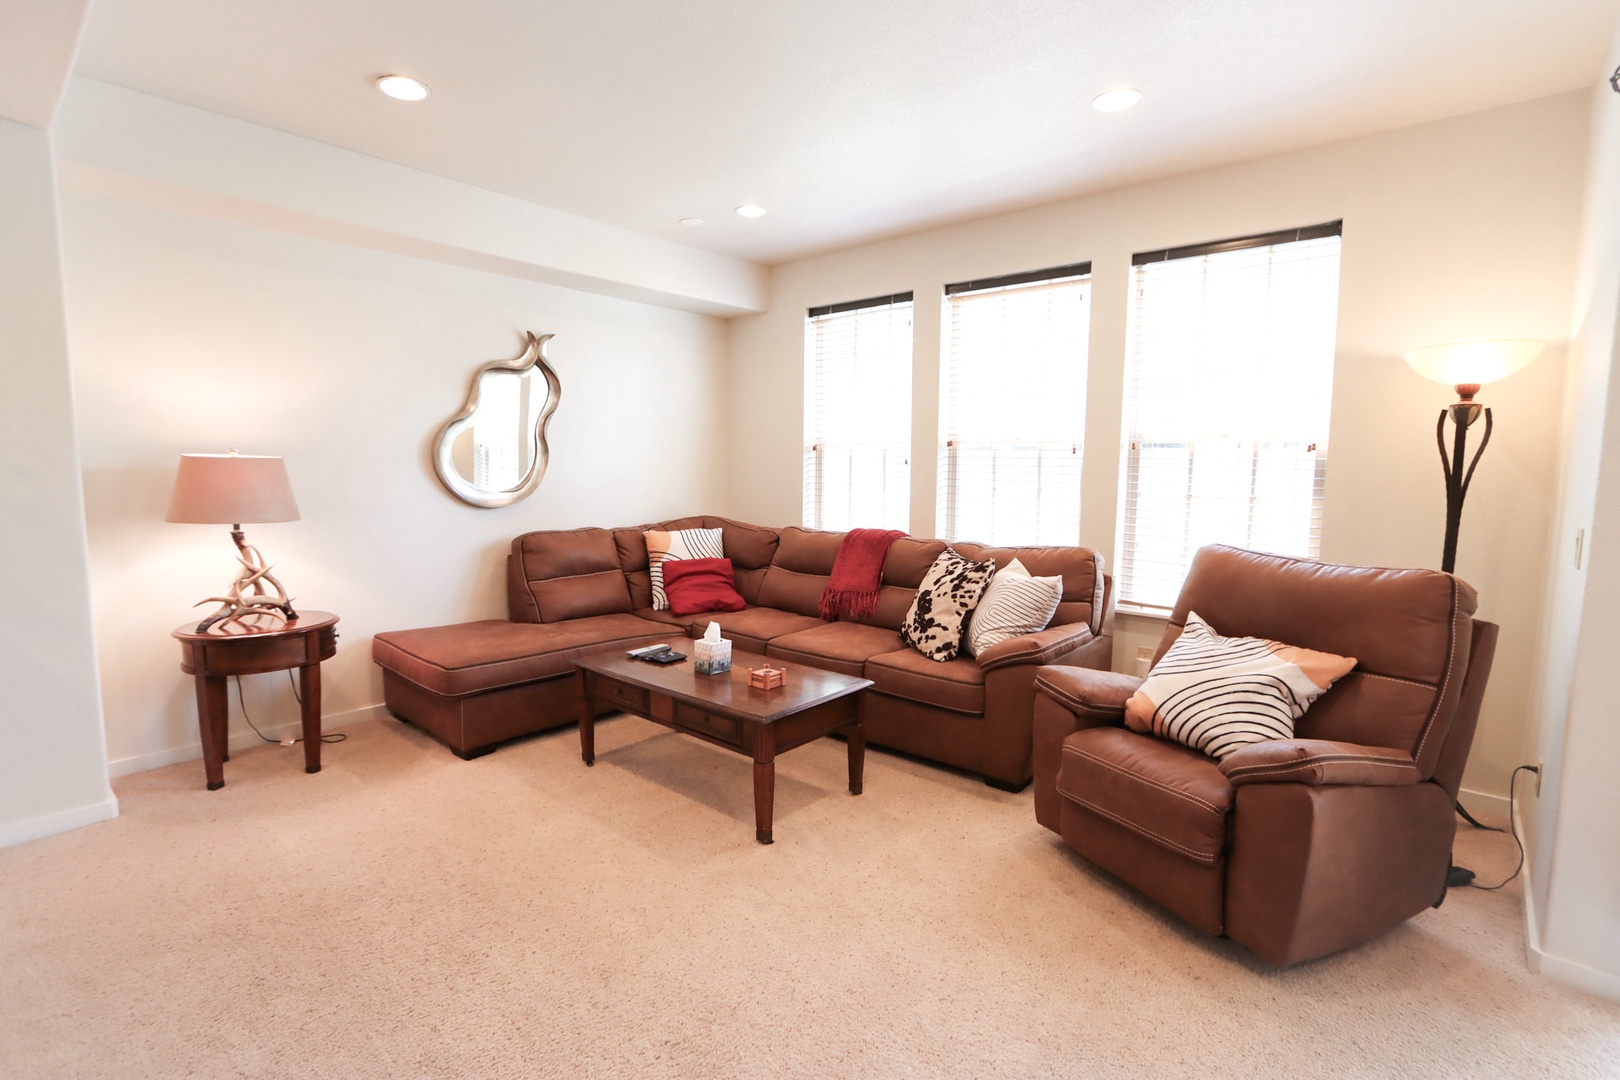 Comfortable seating for family and friends